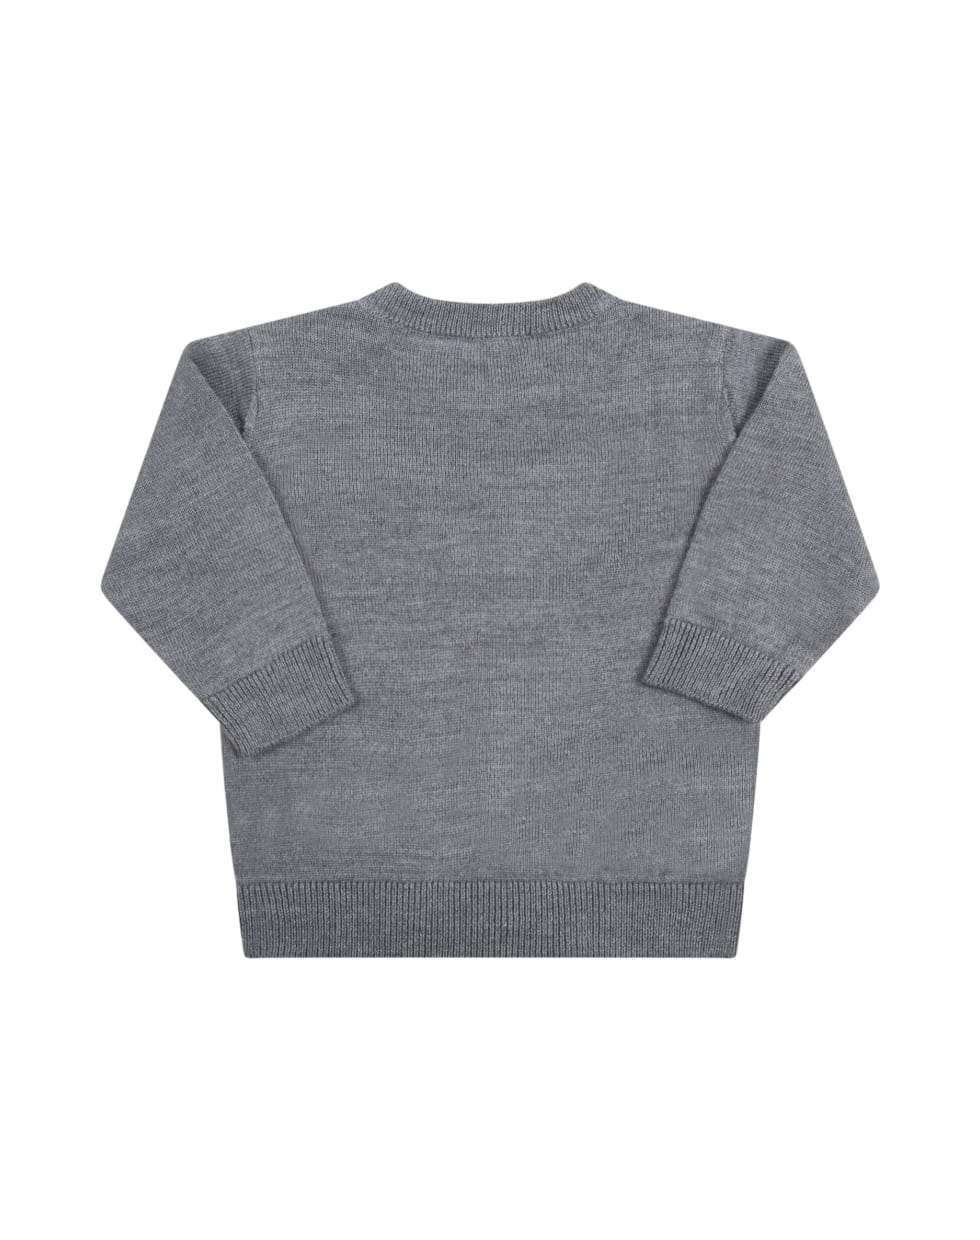 Armani Collezioni Grey Sweater For Baby Boy With Eagle - Grey